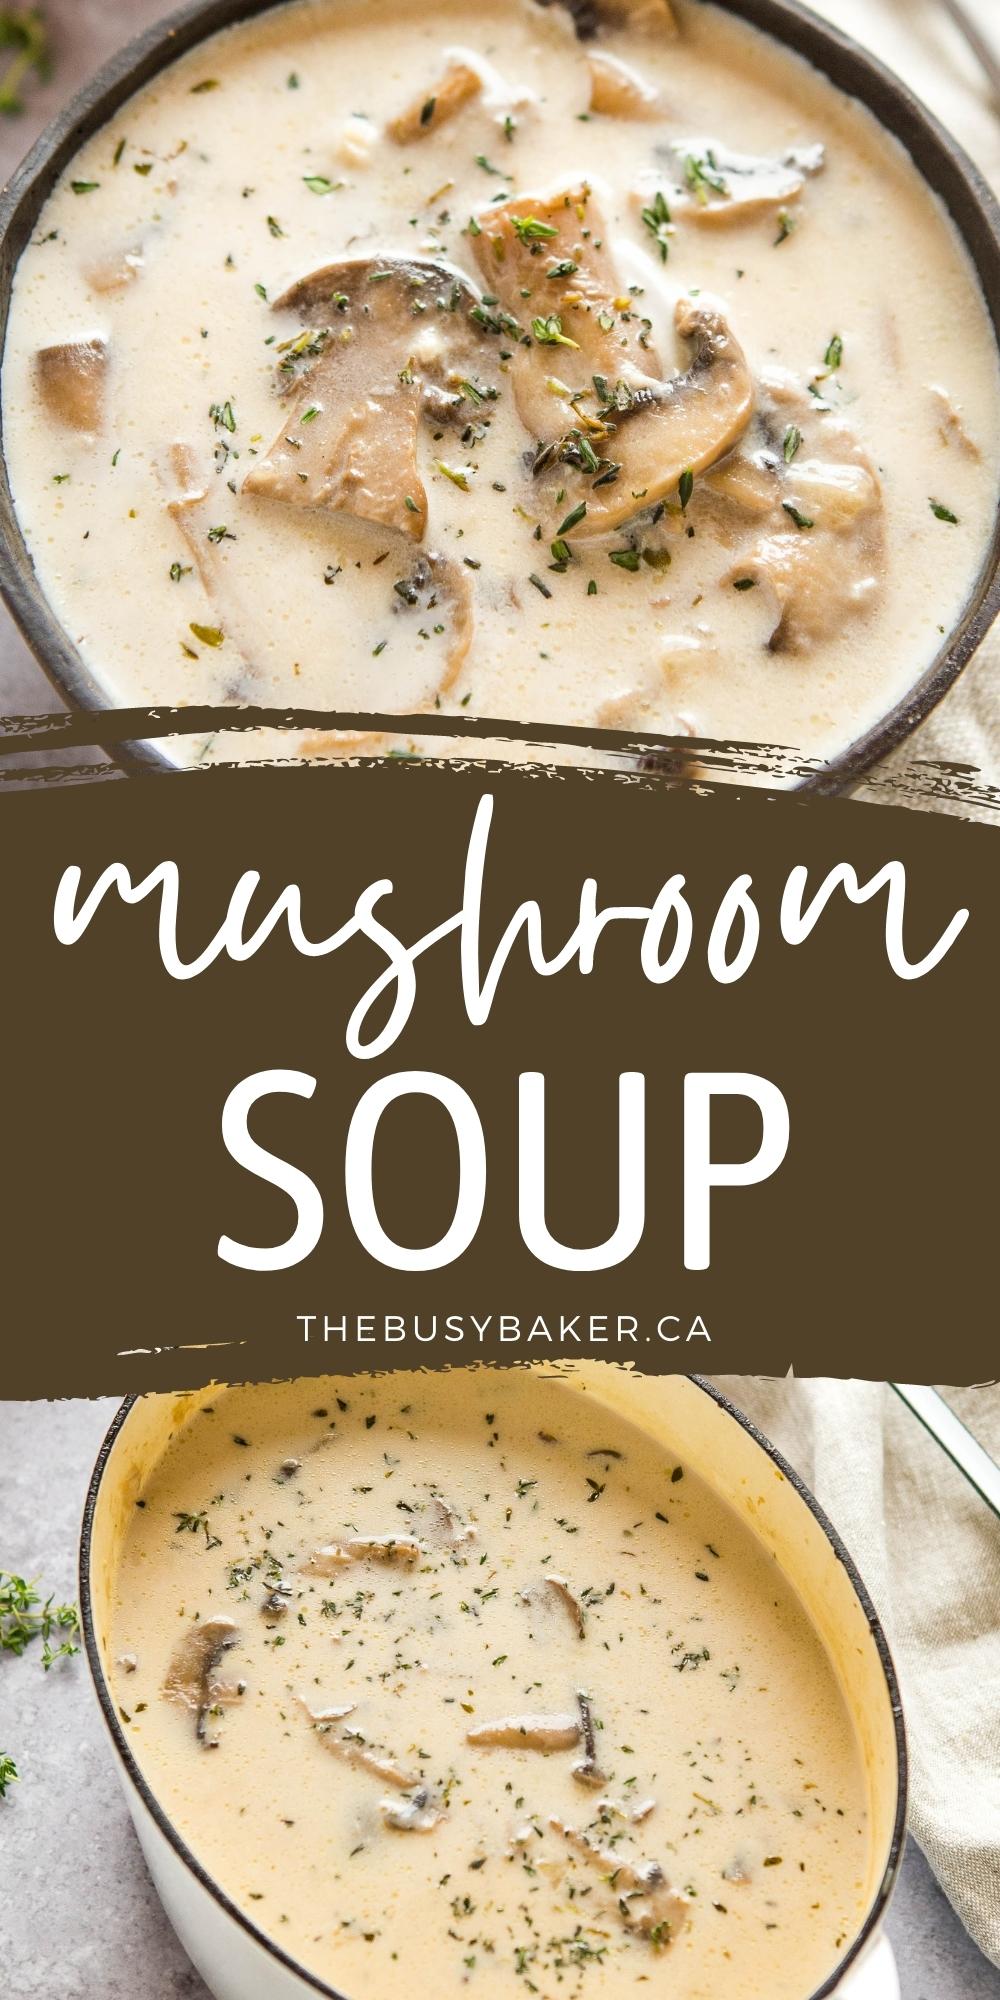 This Homemade Mushroom Soup is savoury and creamy - the perfect vegetarian meal that's easy to make with basic ingredients. Recipe from thebusybaker.ca! #mushroomsoup #homemadesoup #recipe #homemade #dinner #lunch #easyweeknightmeal via @busybakerblog